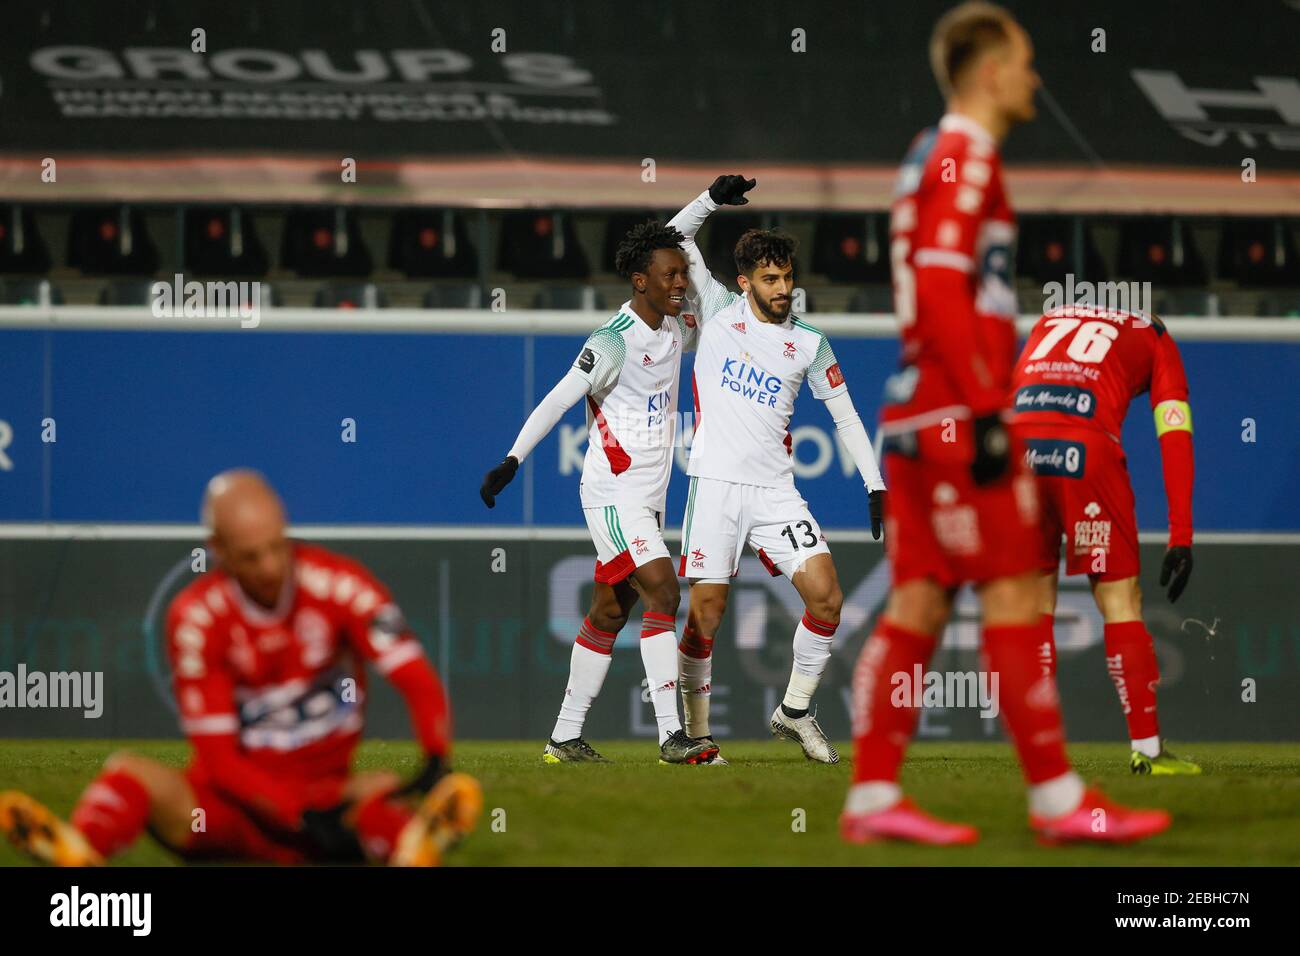 OHL's Kamal Sowah celebrates after scoring during a soccer match between OH Leuven and KV Kortrijk, Friday 12 February 2021 in Oud-Heverlee, on day 26 Stock Photo